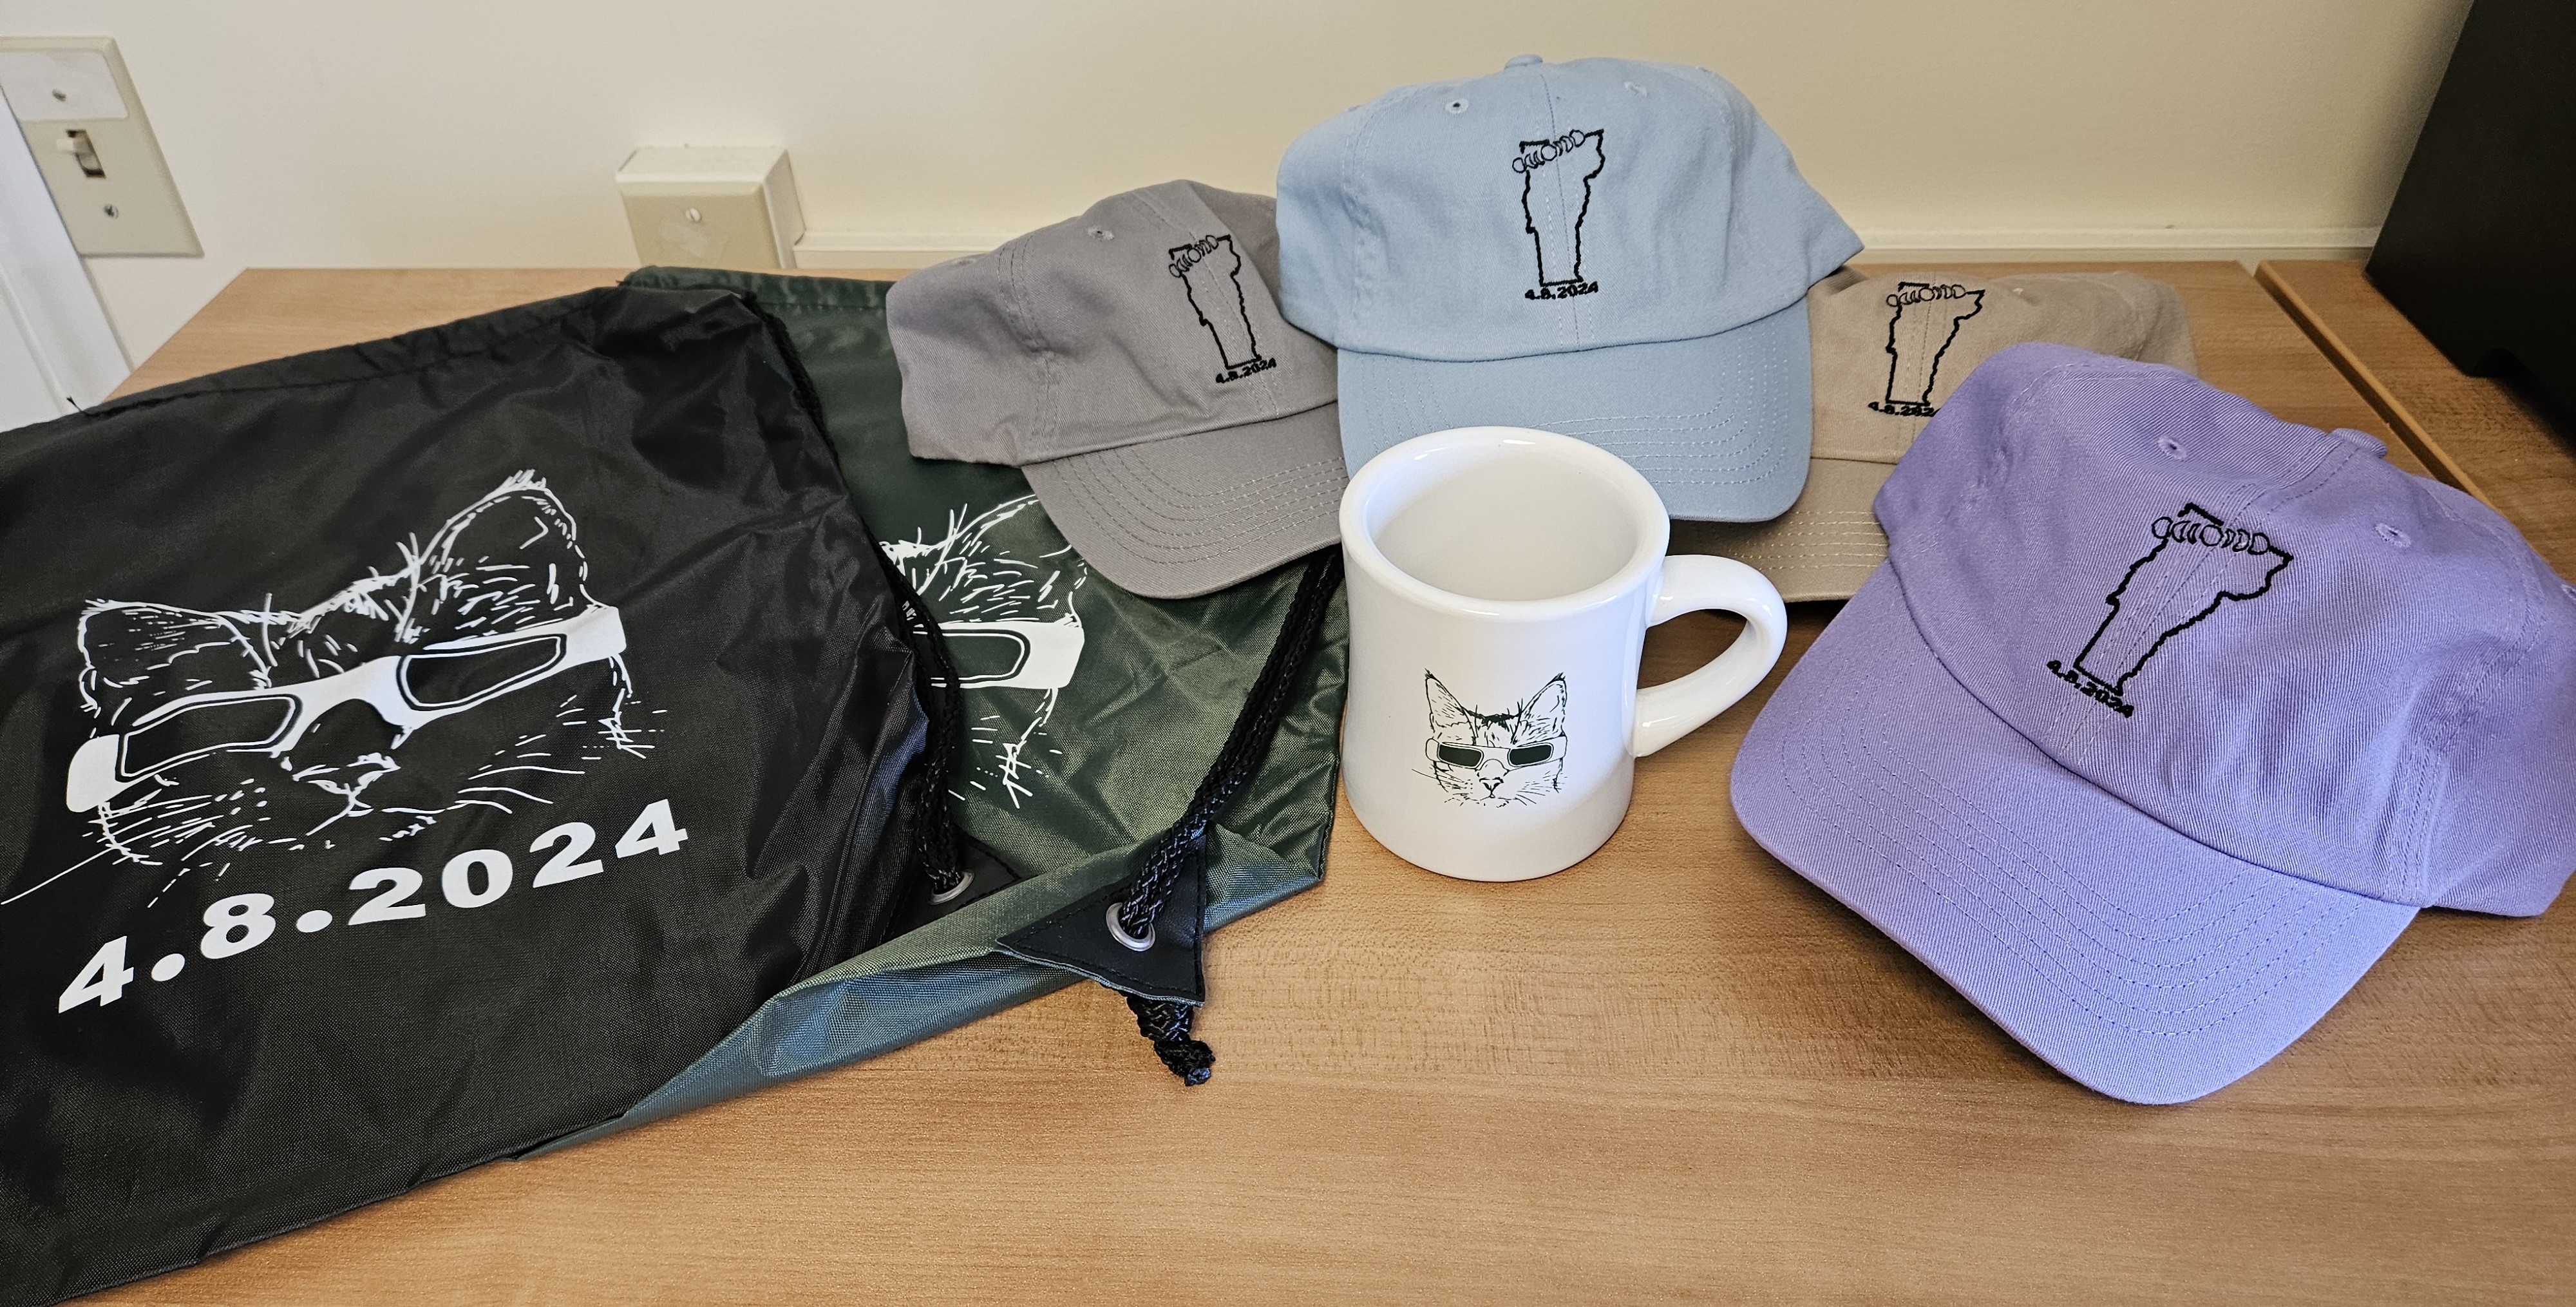 eclipse swag showing drawstring bags with the eclipse cat, baseball hats with the eclipse path embroidered on them, and a diner mug with the eclipse cat.